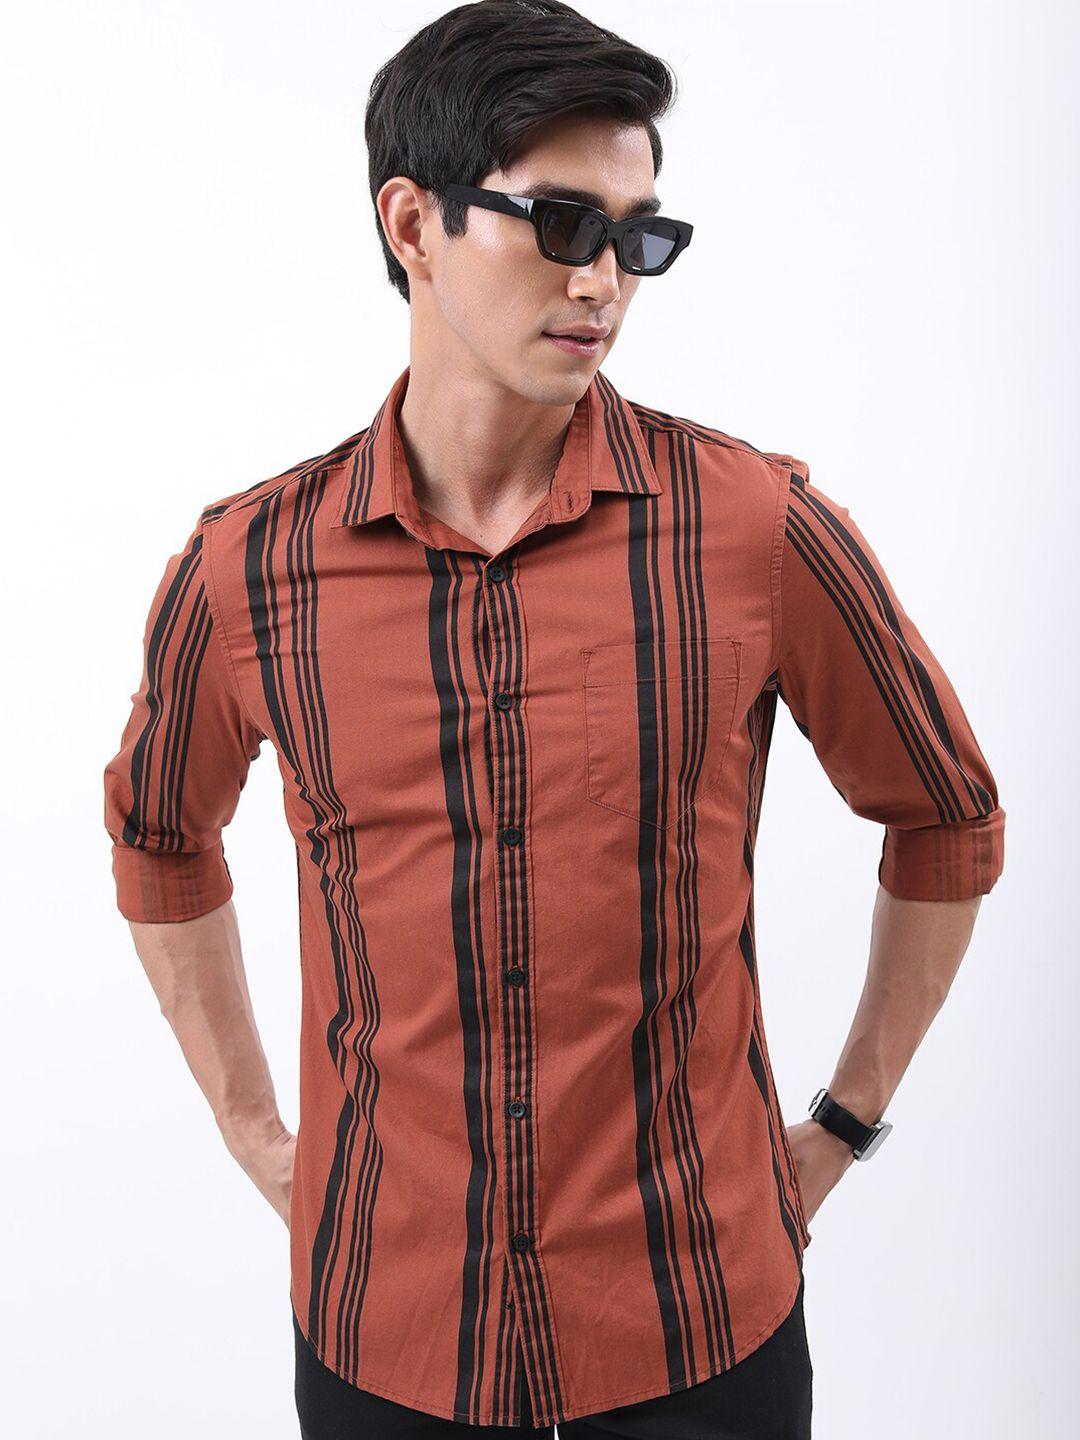 highlander rust and black slim fit vertical striped cotton casual shirt